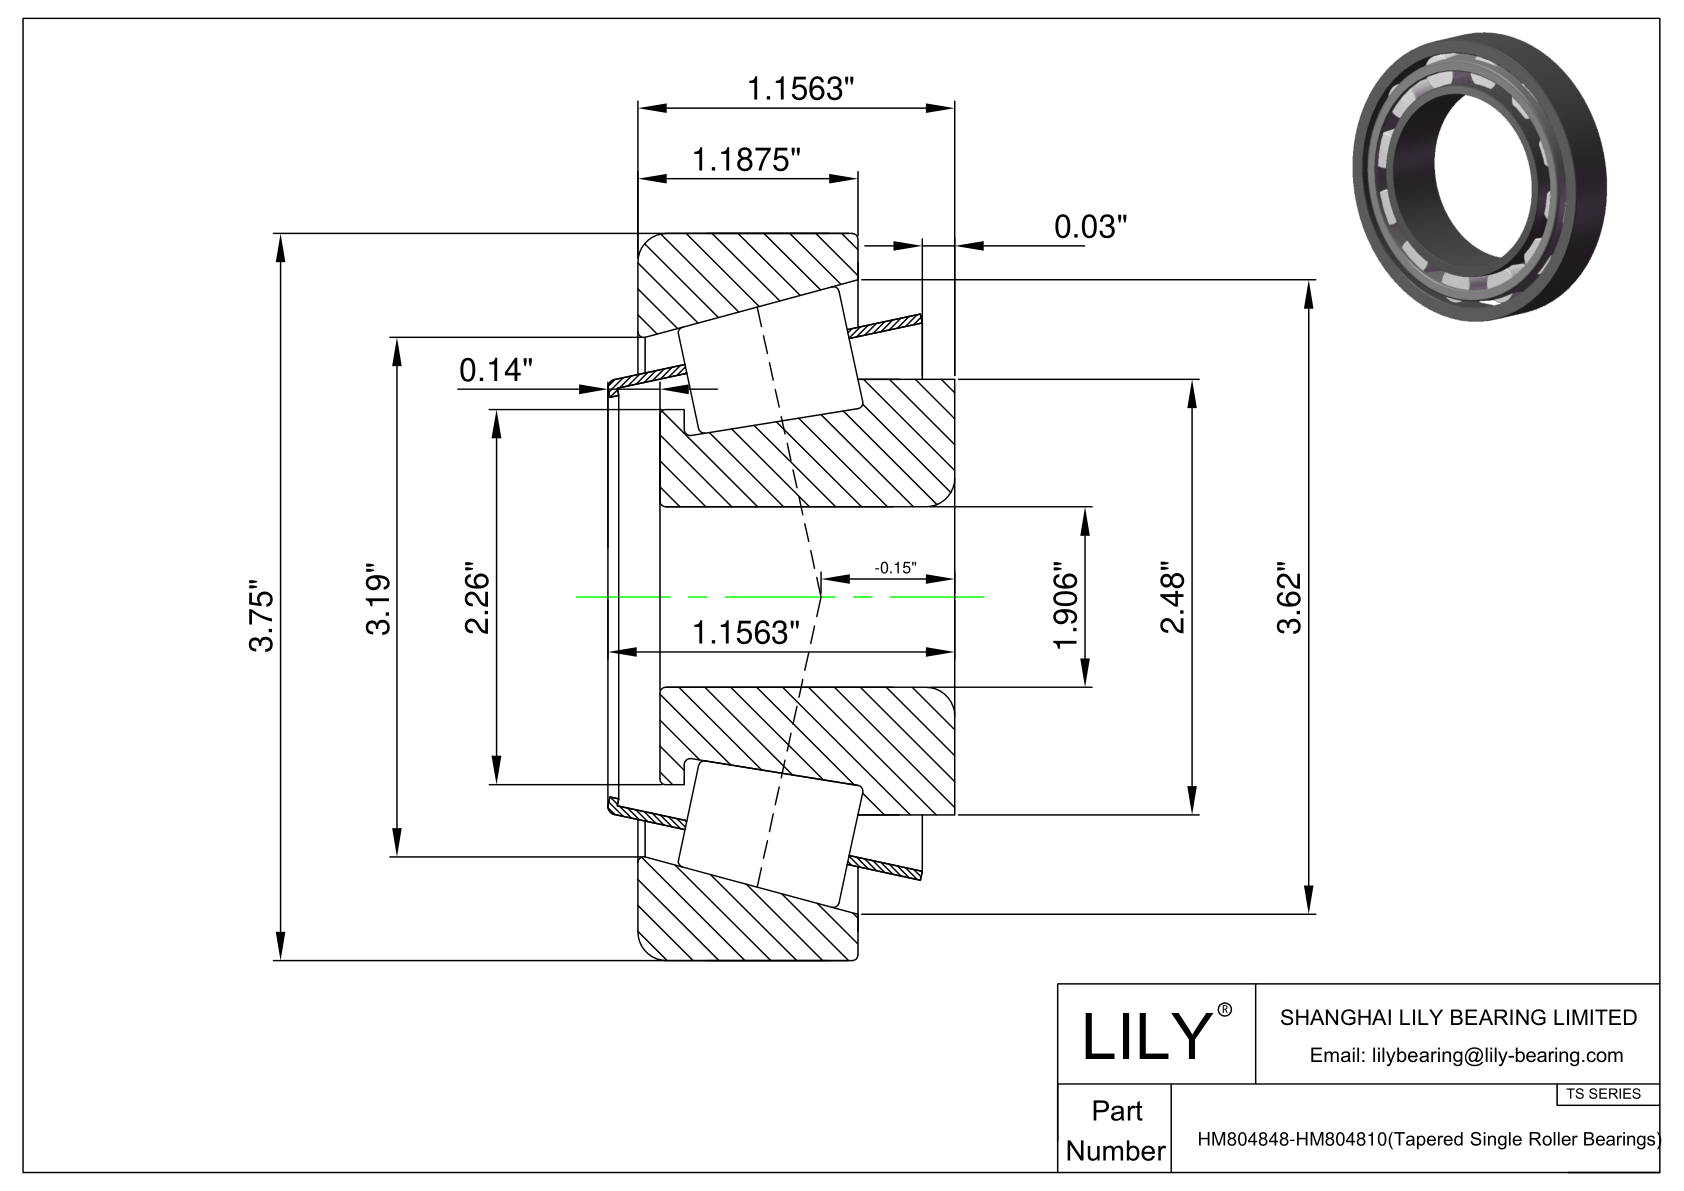 HM804848-HM804810 TS (Tapered Single Roller Bearings) (Imperial) cad drawing